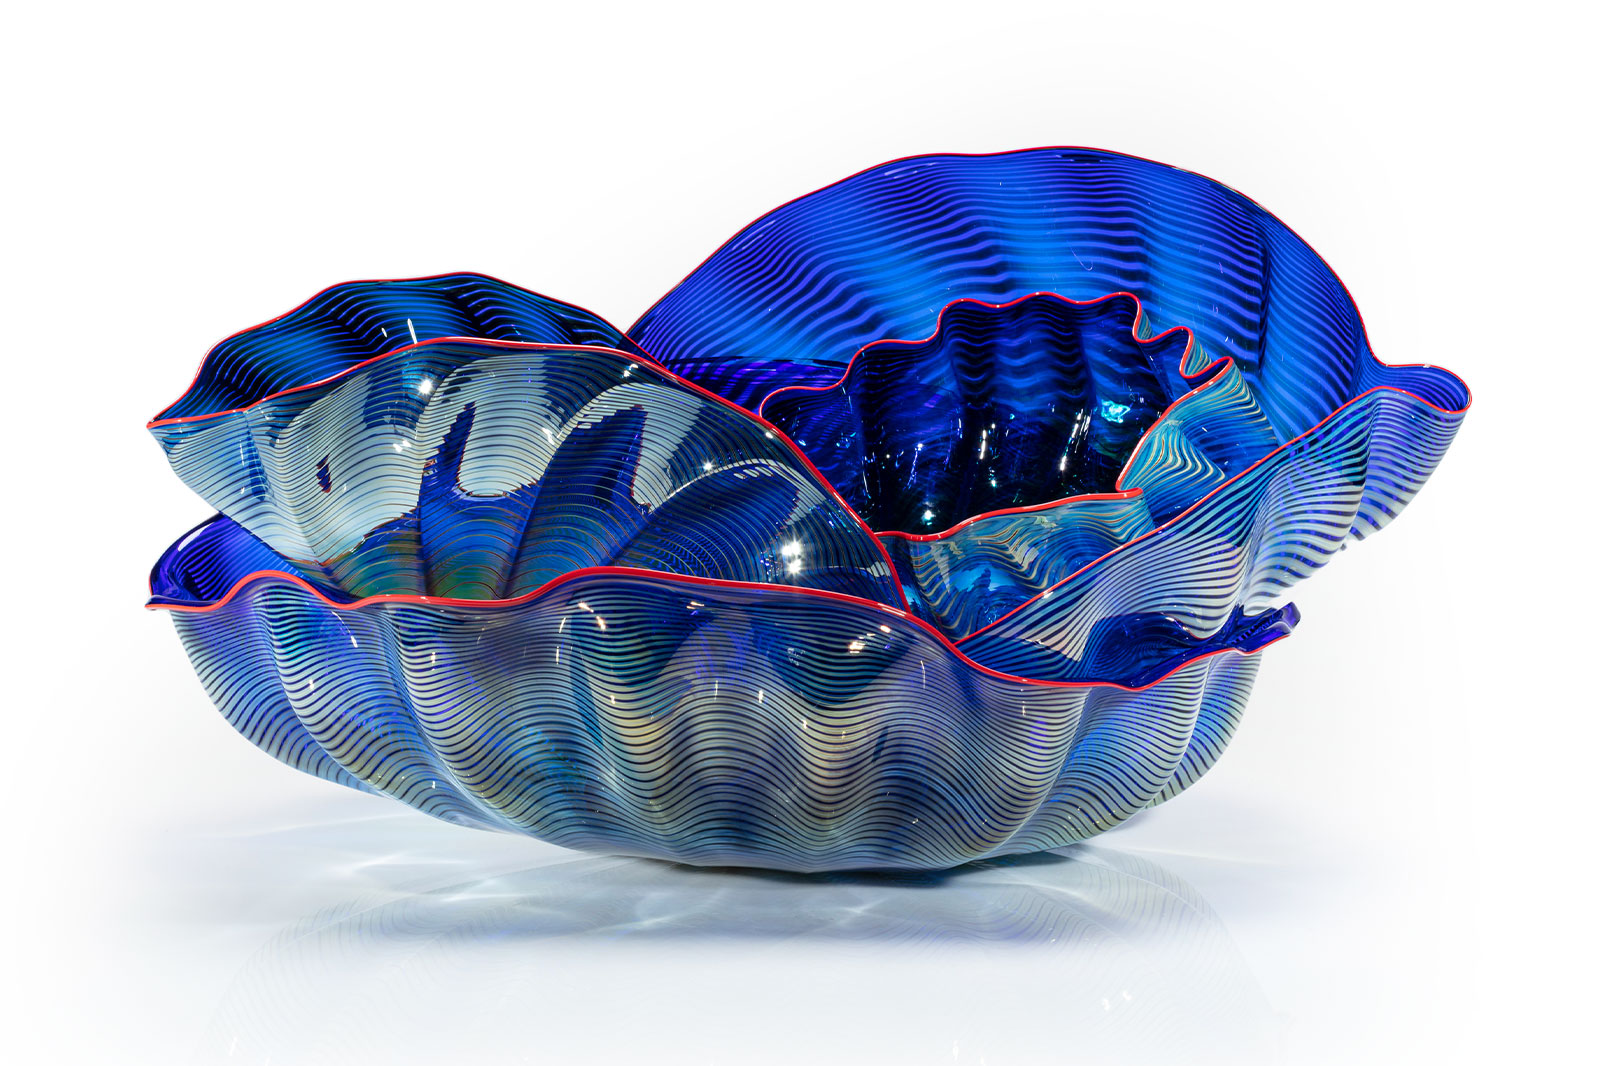 Cobalt and Silver Seaform Set with Red Lip Wraps, 1997, By Dale Chihuly